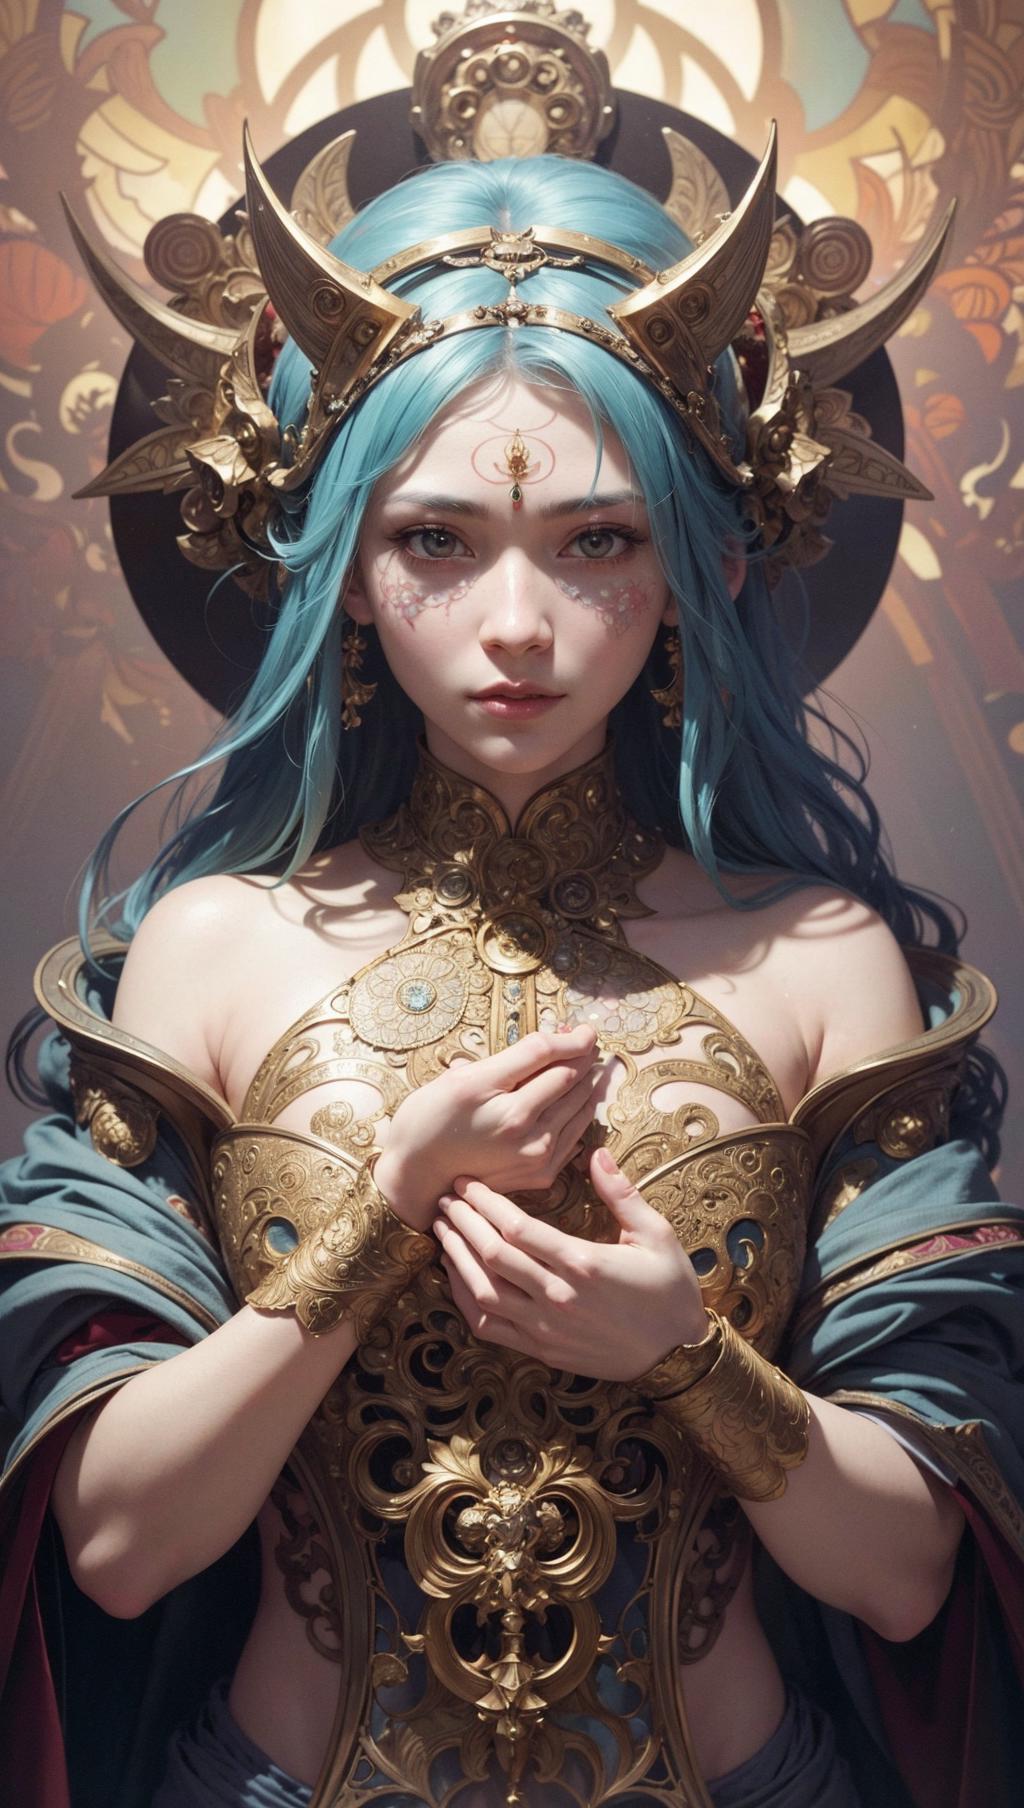 A blue-haired woman with a gold dress and gold accessories is the focus of this artistic portrait.